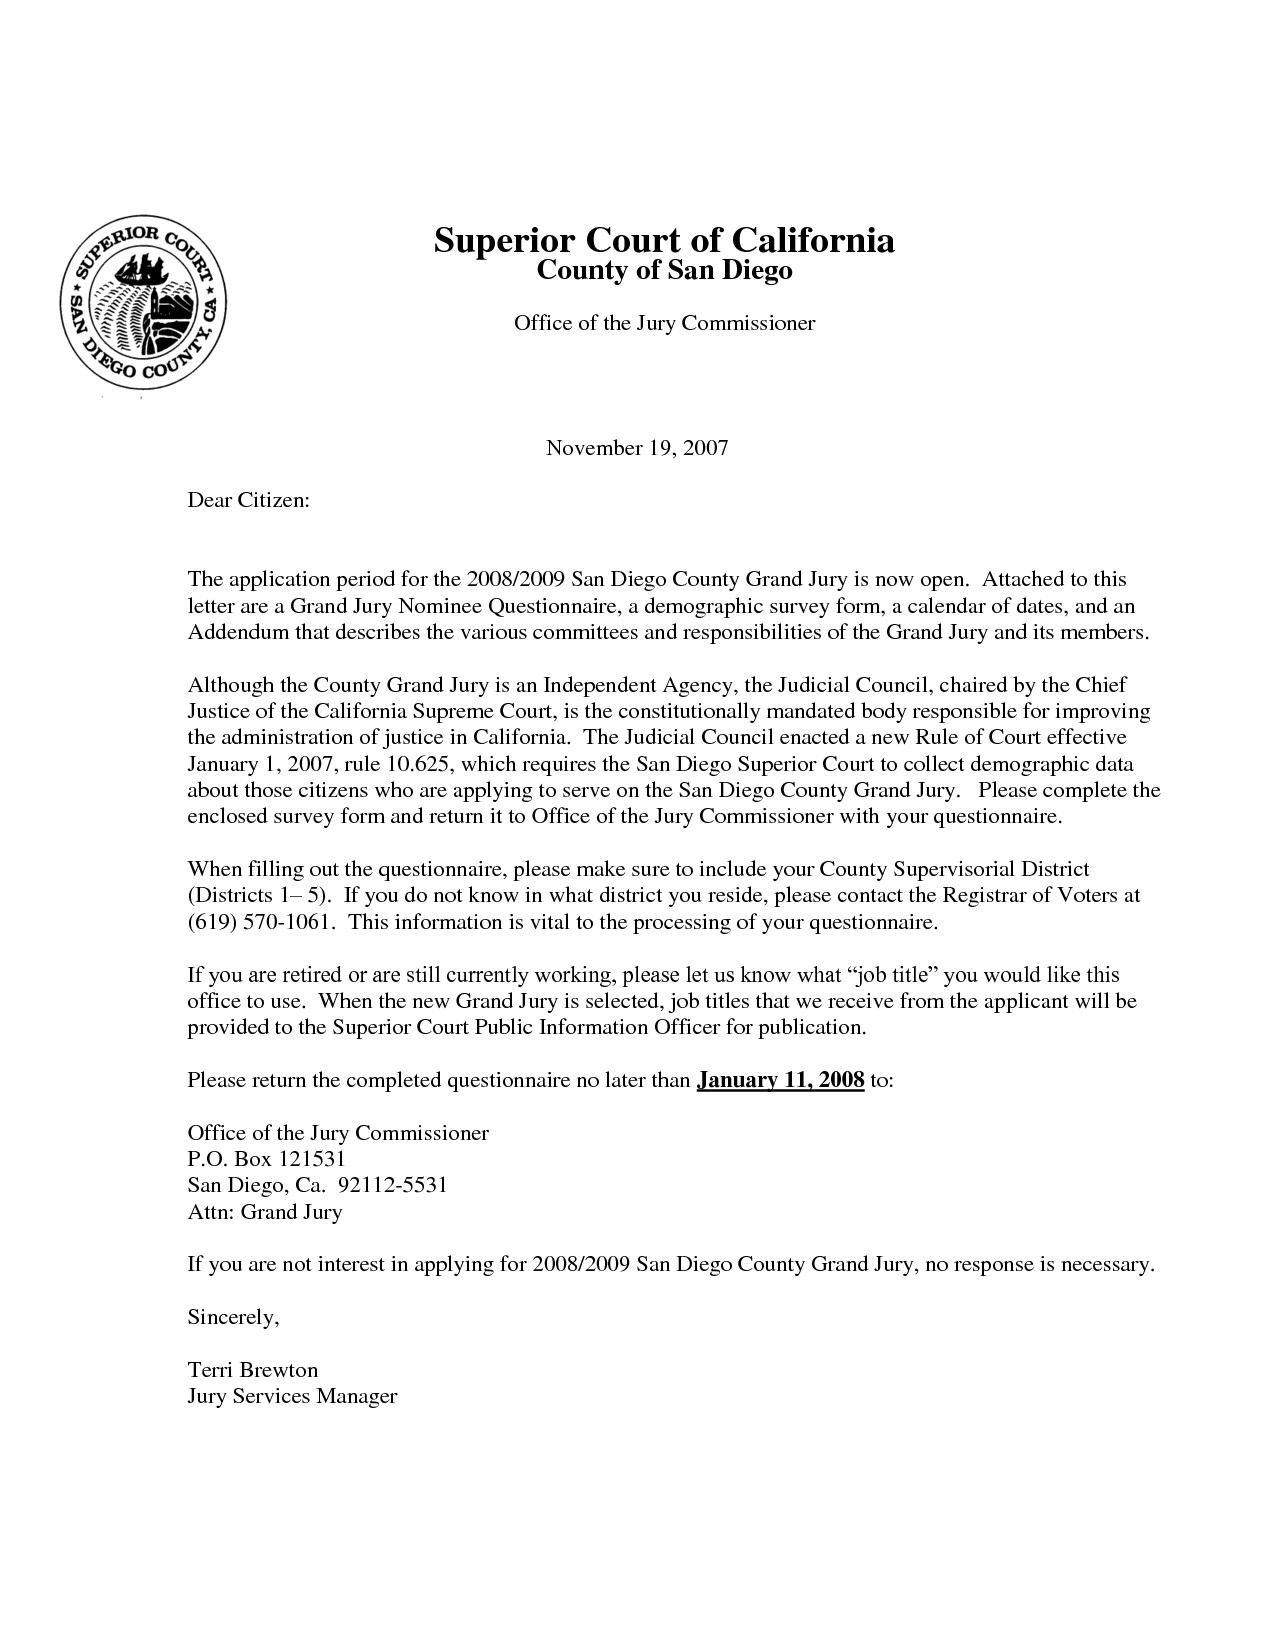 Character Reference Letter for Court Child Custody Template - Sample Character Reference for Court New Sample Character Reference